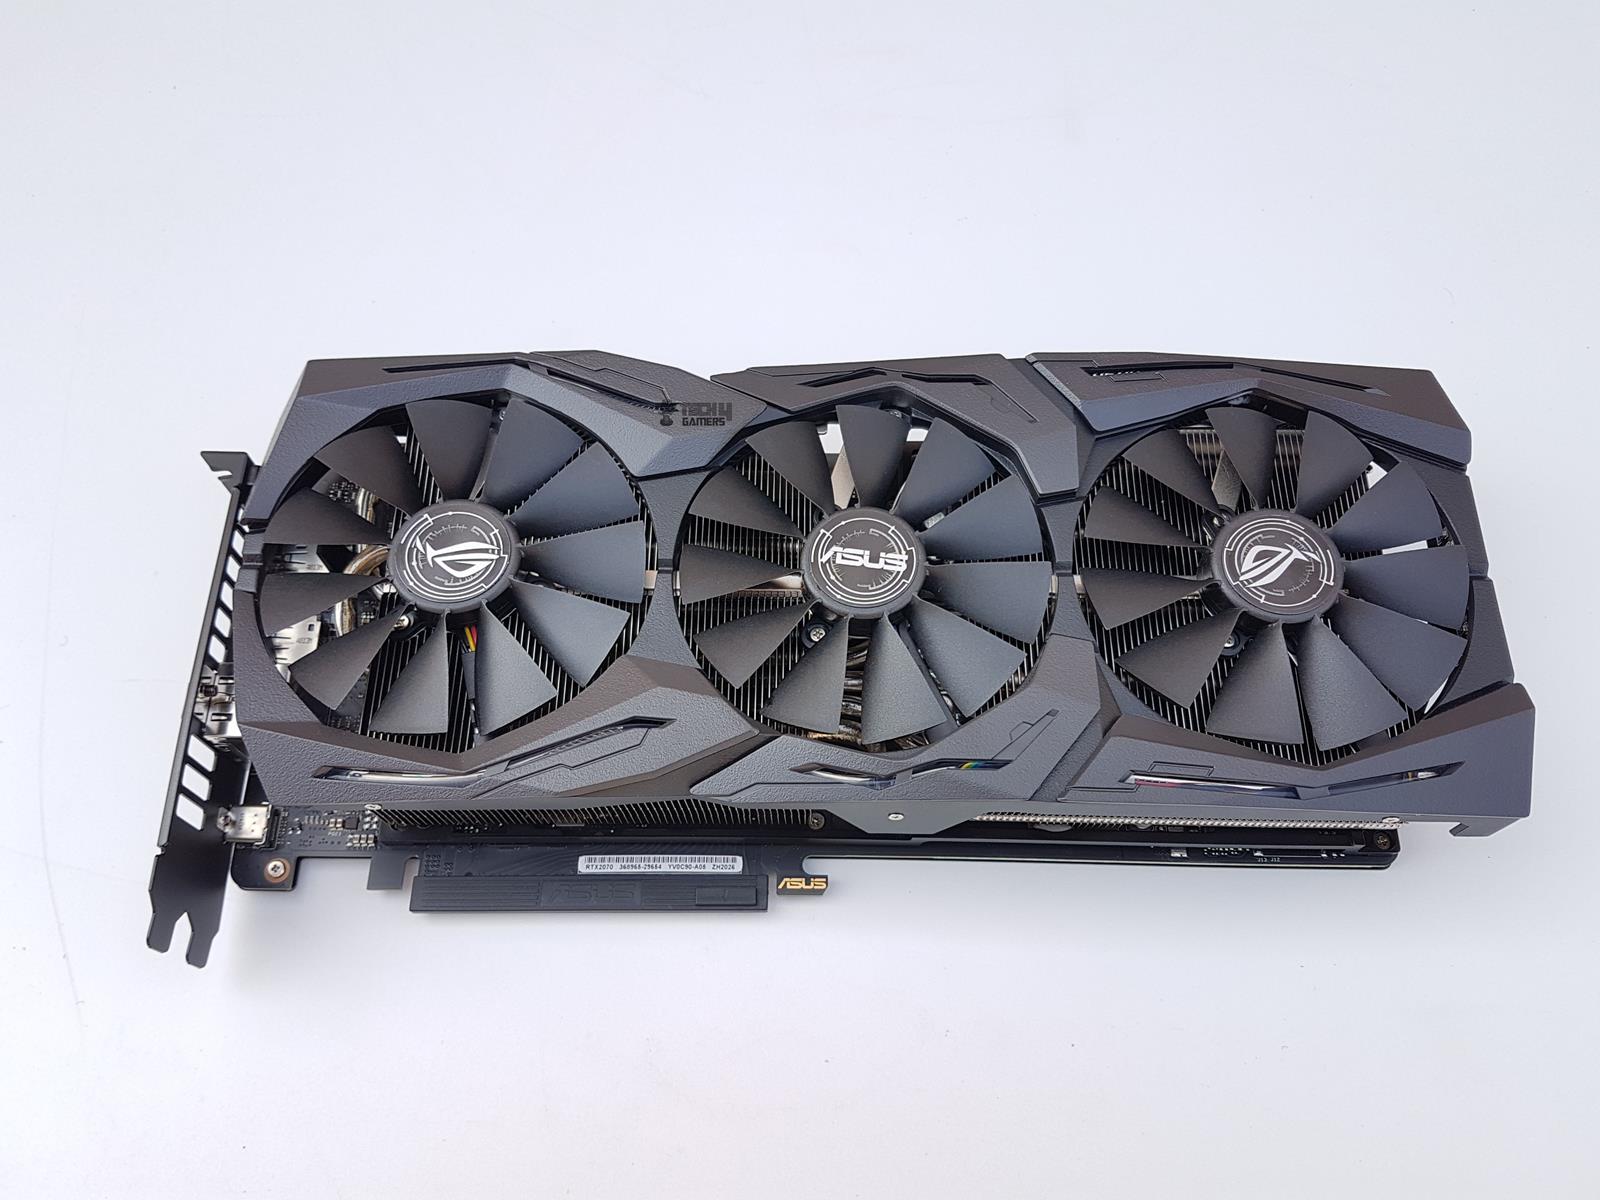 Asus GeForce RTX 2070 O8G Graphics Card Review